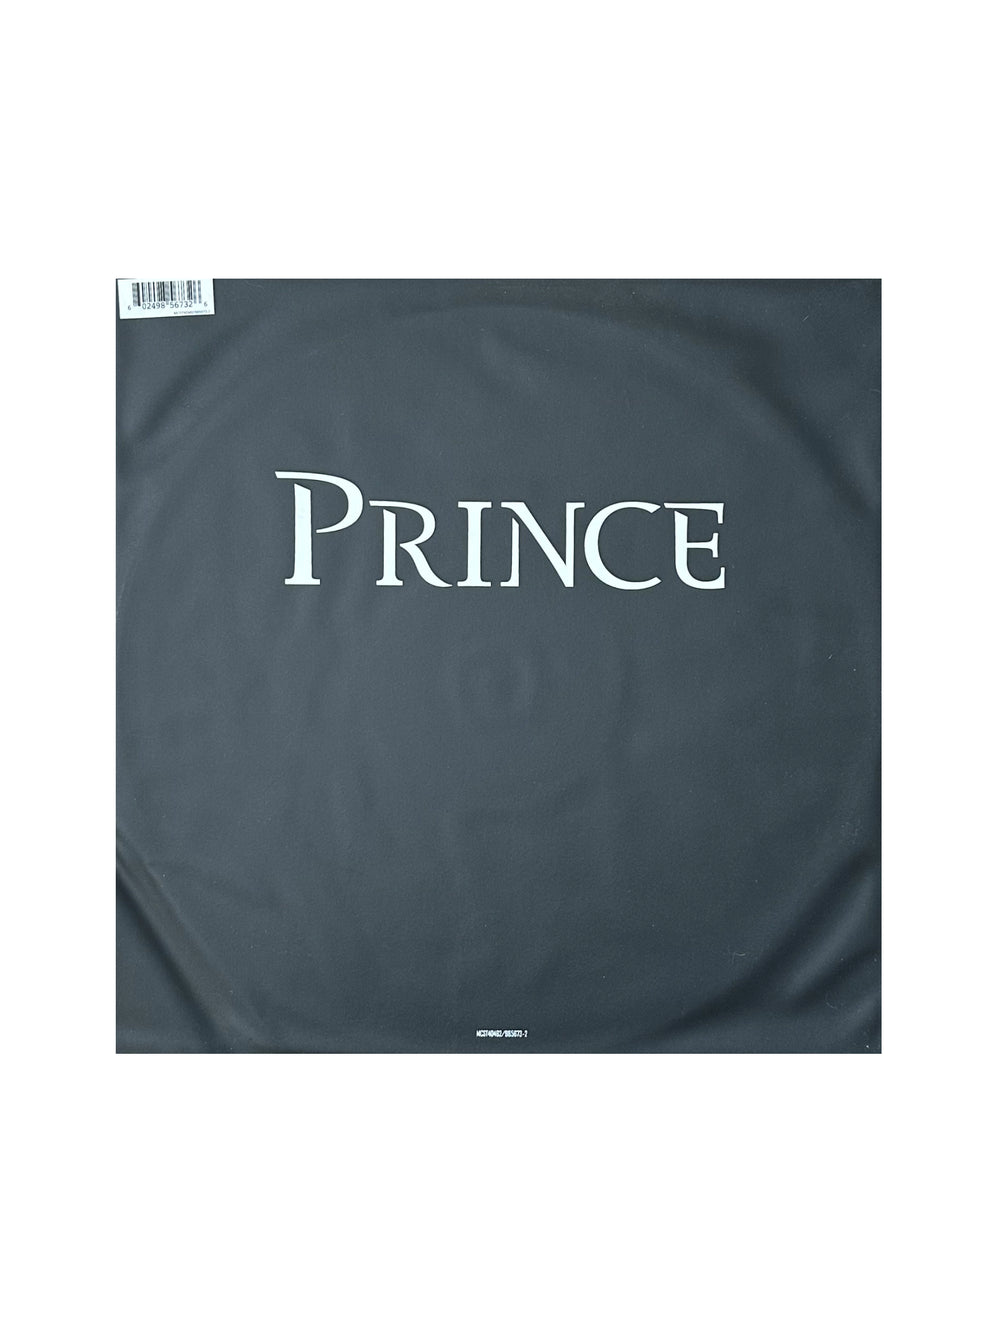 Prince – Fury Format: Vinyl 12 Picture Disc UK Released: 2006